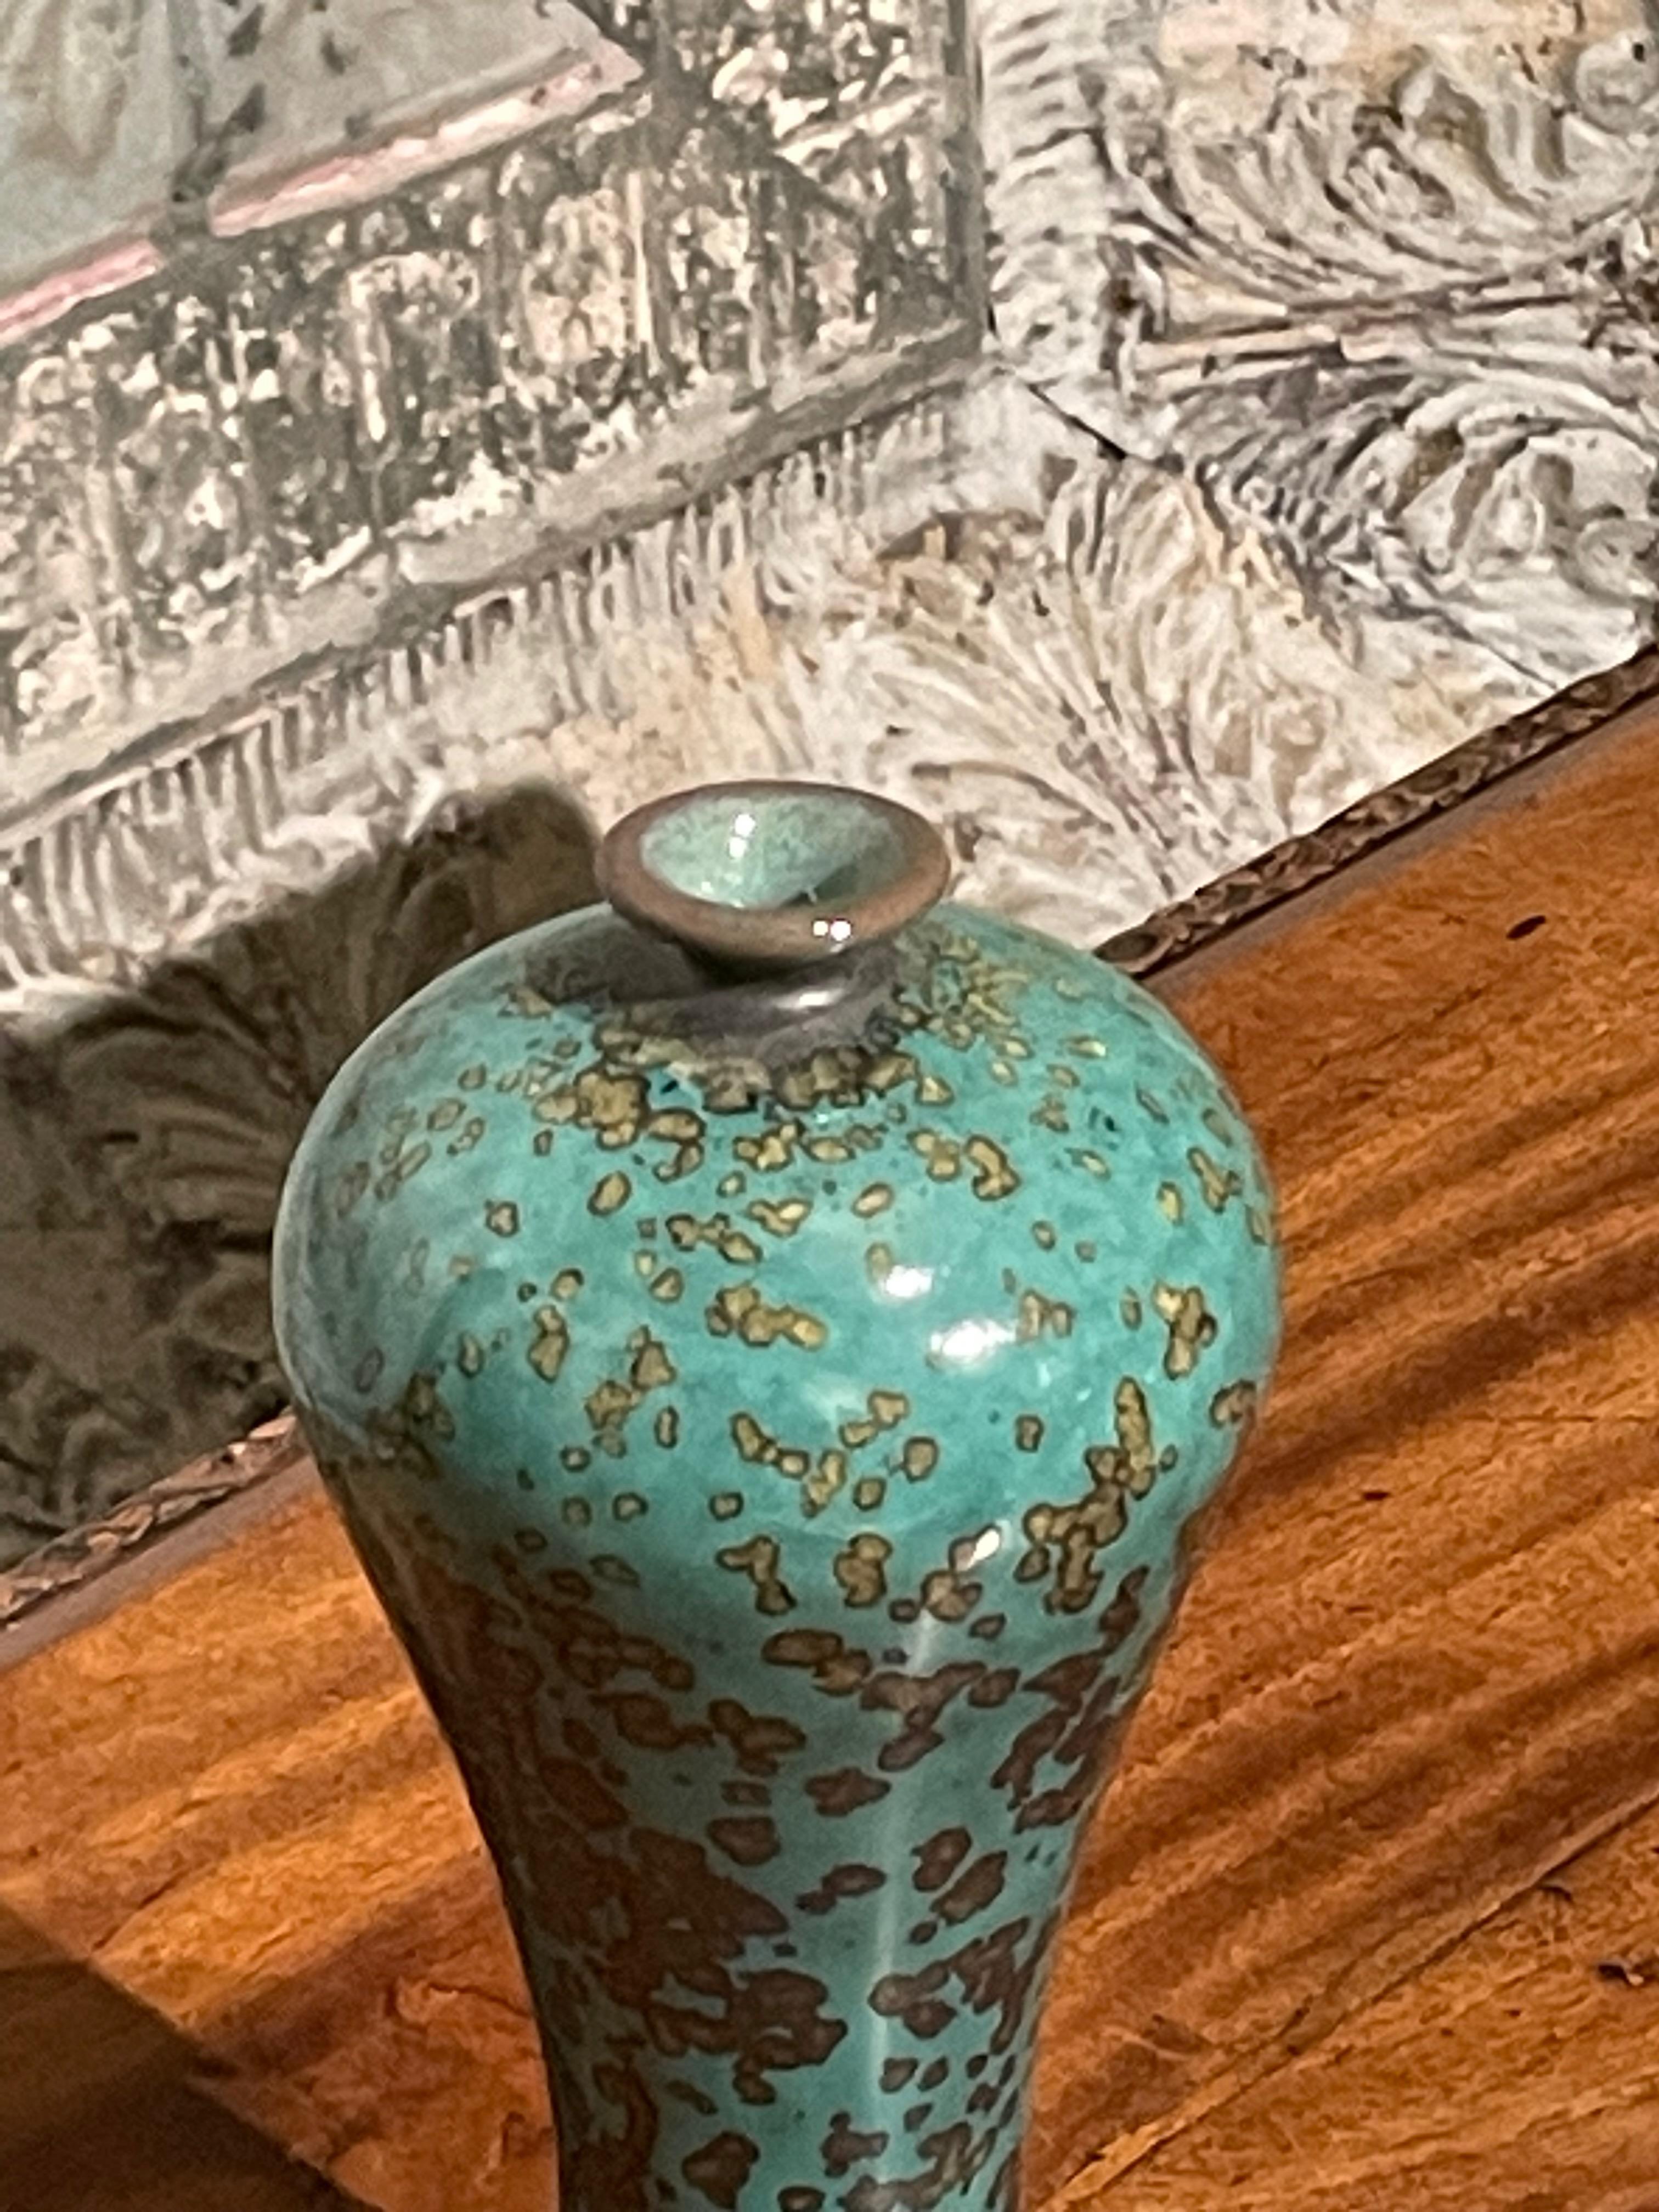 Contemporary Chinese turquoise with gold speckled glaze vase.
Small spout and tulip shaped.
One of several pieces from a large collection.
ARRIVING MARCH